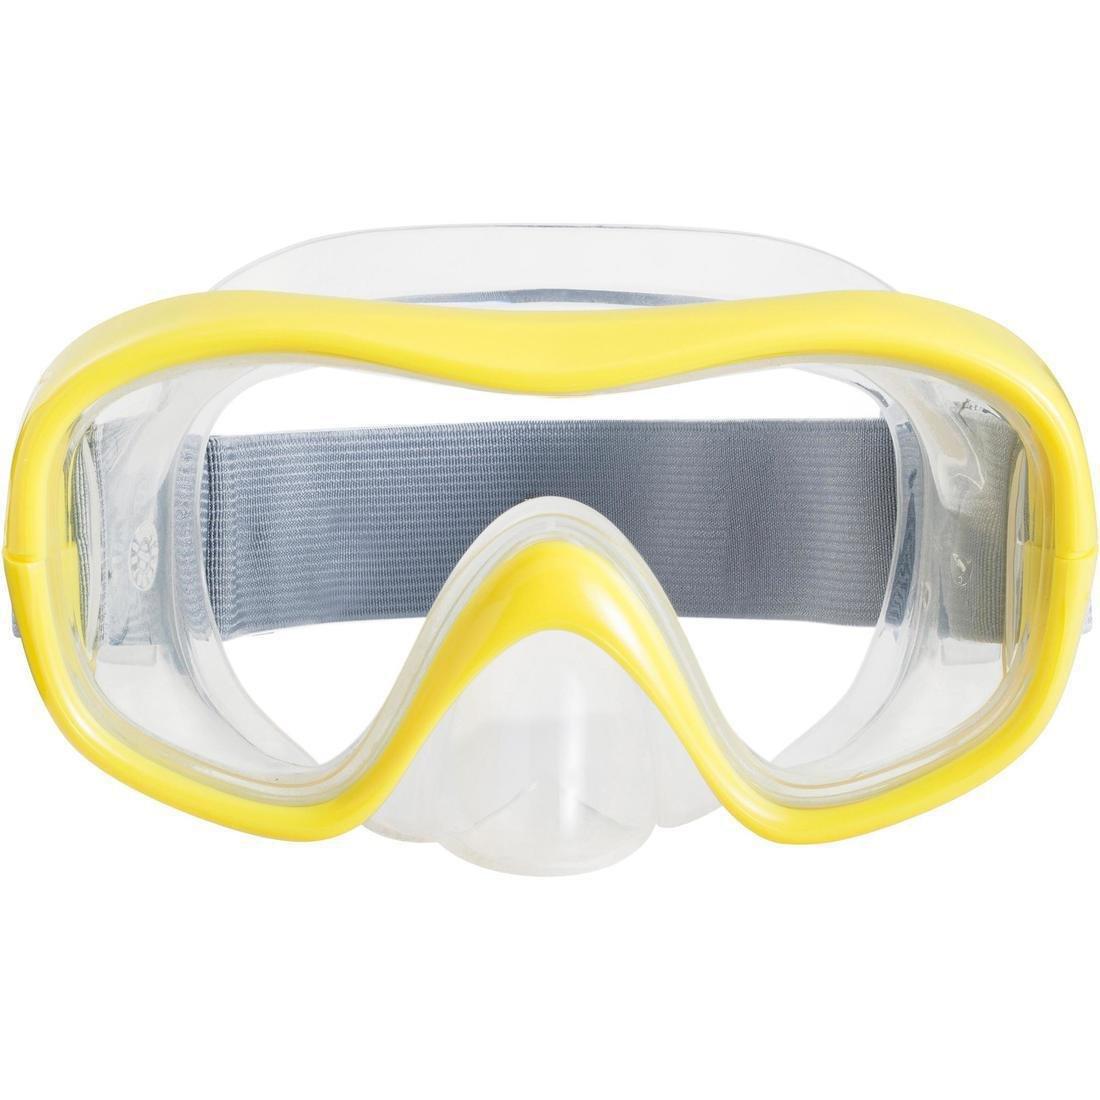 SUBEA - SNK 500 Adult and Junior Mask and Snorkel Snorkelling Set, Storm Grey